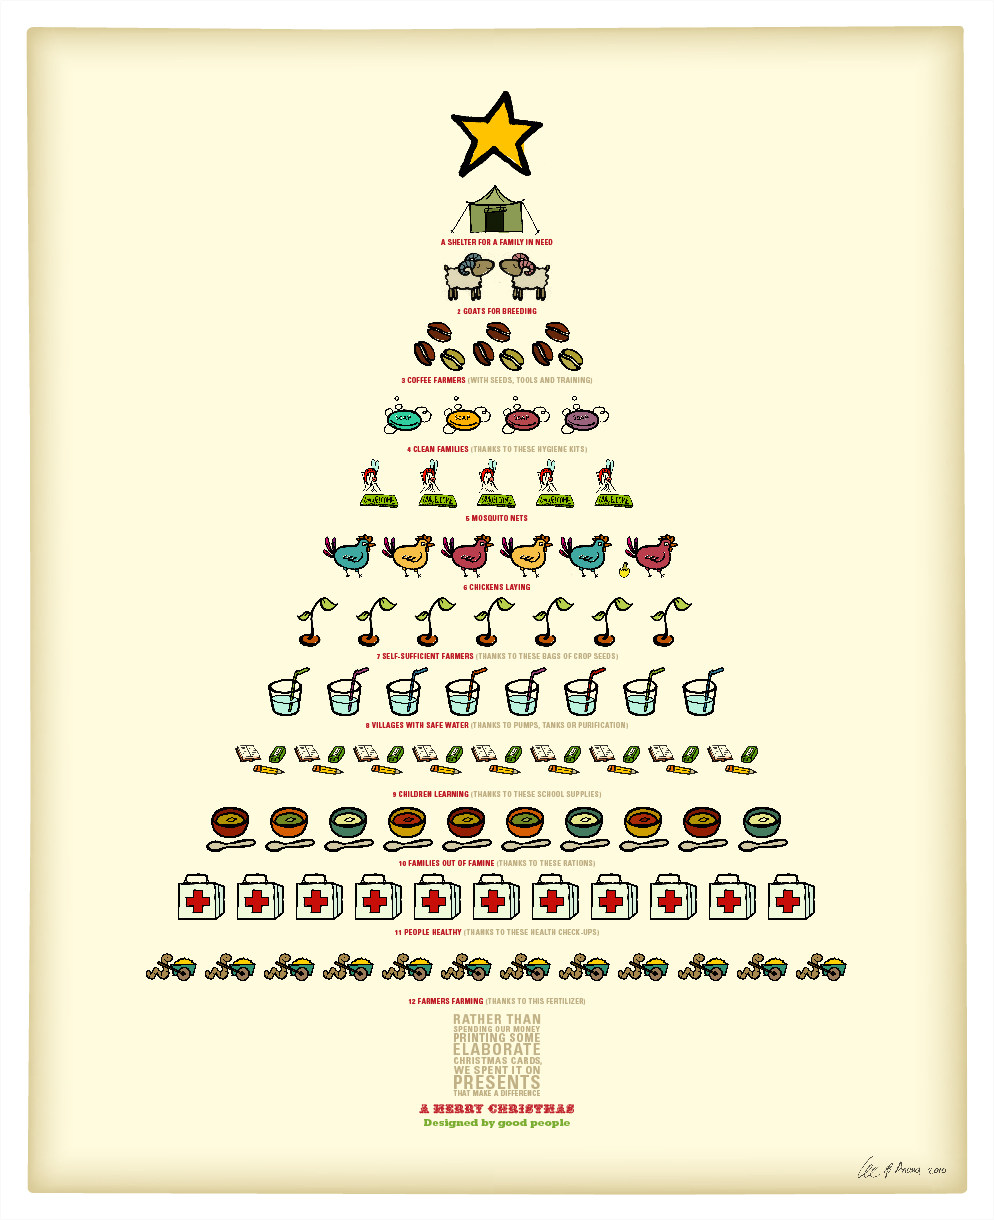 Merry Christmas Designed By Good People 2010